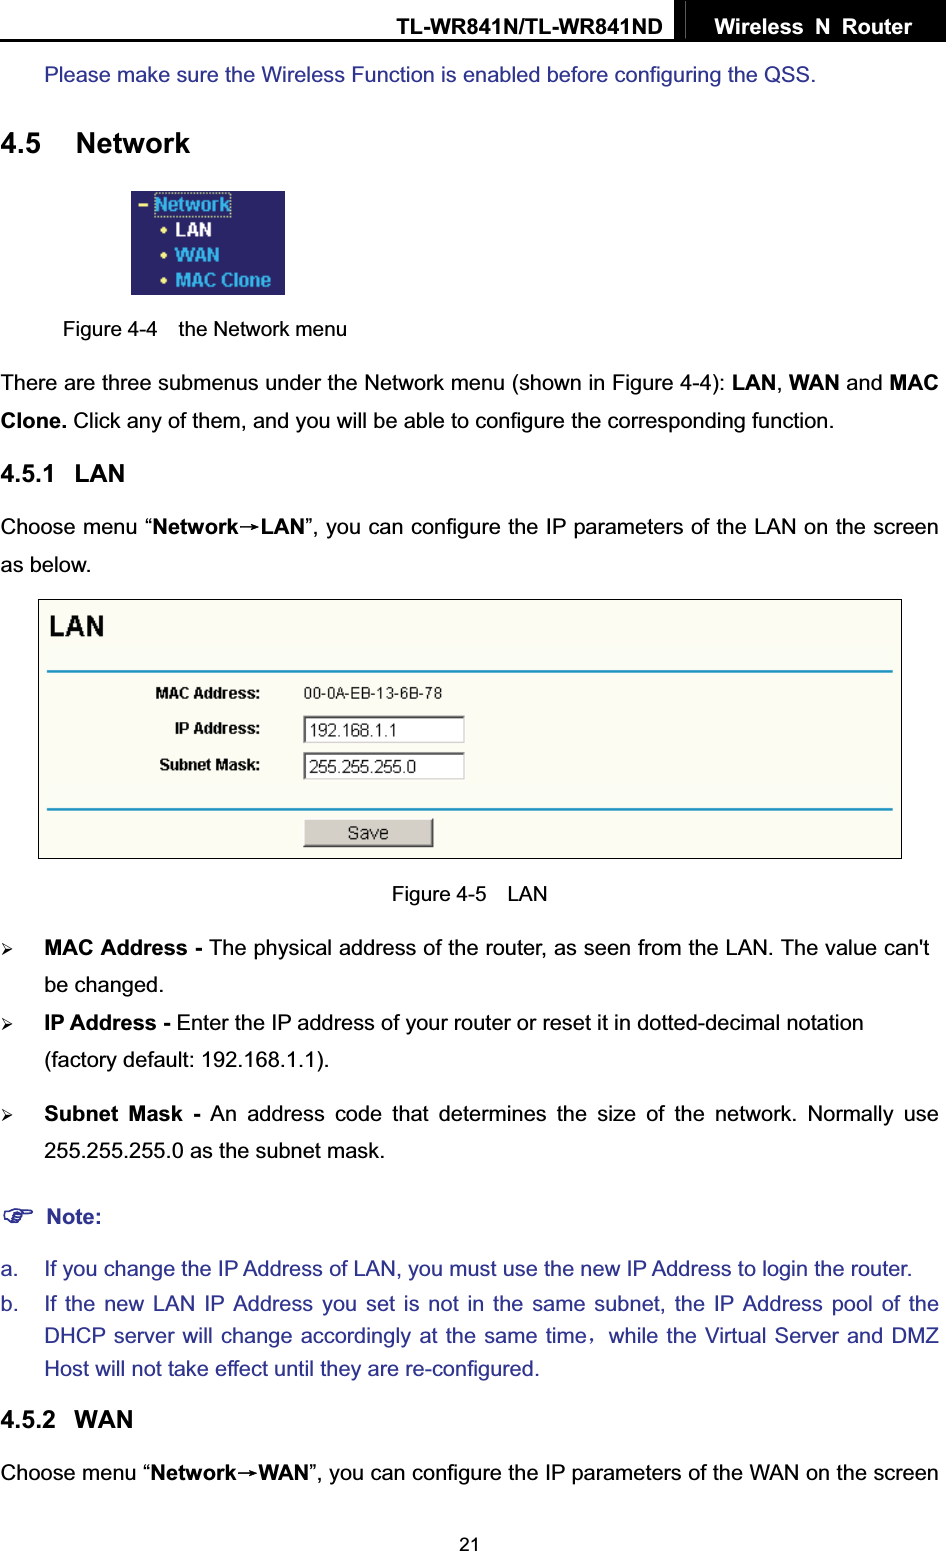 TL-WR841N/TL-WR841ND  Wireless N Router  21Please make sure the Wireless Function is enabled before configuring the QSS.4.5 NetworkFigure 4-4  the Network menu There are three submenus under the Network menu (shown in Figure 4-4): LAN,WAN and MACClone. Click any of them, and you will be able to configure the corresponding function.   4.5.1 LANChoose menu “NetworkėLAN”, you can configure the IP parameters of the LAN on the screen as below. Figure 4-5  LAN ¾MAC Address - The physical address of the router, as seen from the LAN. The value can&apos;t be changed. ¾IP Address - Enter the IP address of your router or reset it in dotted-decimal notation (factory default: 192.168.1.1). ¾Subnet Mask - An address code that determines the size of the network. Normally use 255.255.255.0 as the subnet mask.   )Note:a.  If you change the IP Address of LAN, you must use the new IP Address to login the router.   b.  If the new LAN IP Address you set is not in the same subnet, the IP Address pool of the DHCP server will change accordingly at the same timeˈwhile the Virtual Server and DMZ Host will not take effect until they are re-configured. 4.5.2 WANChoose menu “NetworkėWAN”, you can configure the IP parameters of the WAN on the screen 